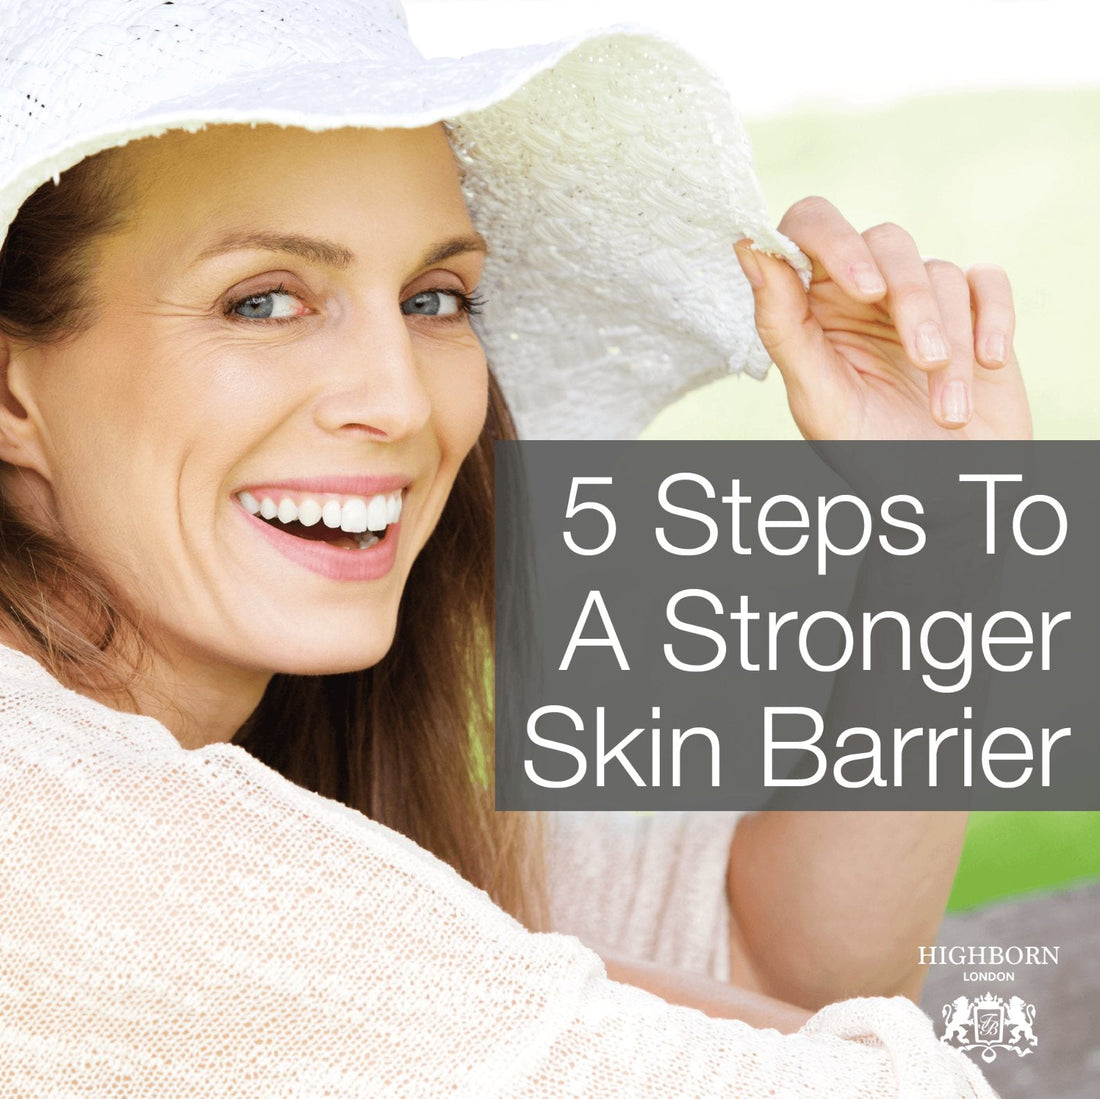 Everything You Need To Know About Your Skin’s Barrier Function - HighBorn London